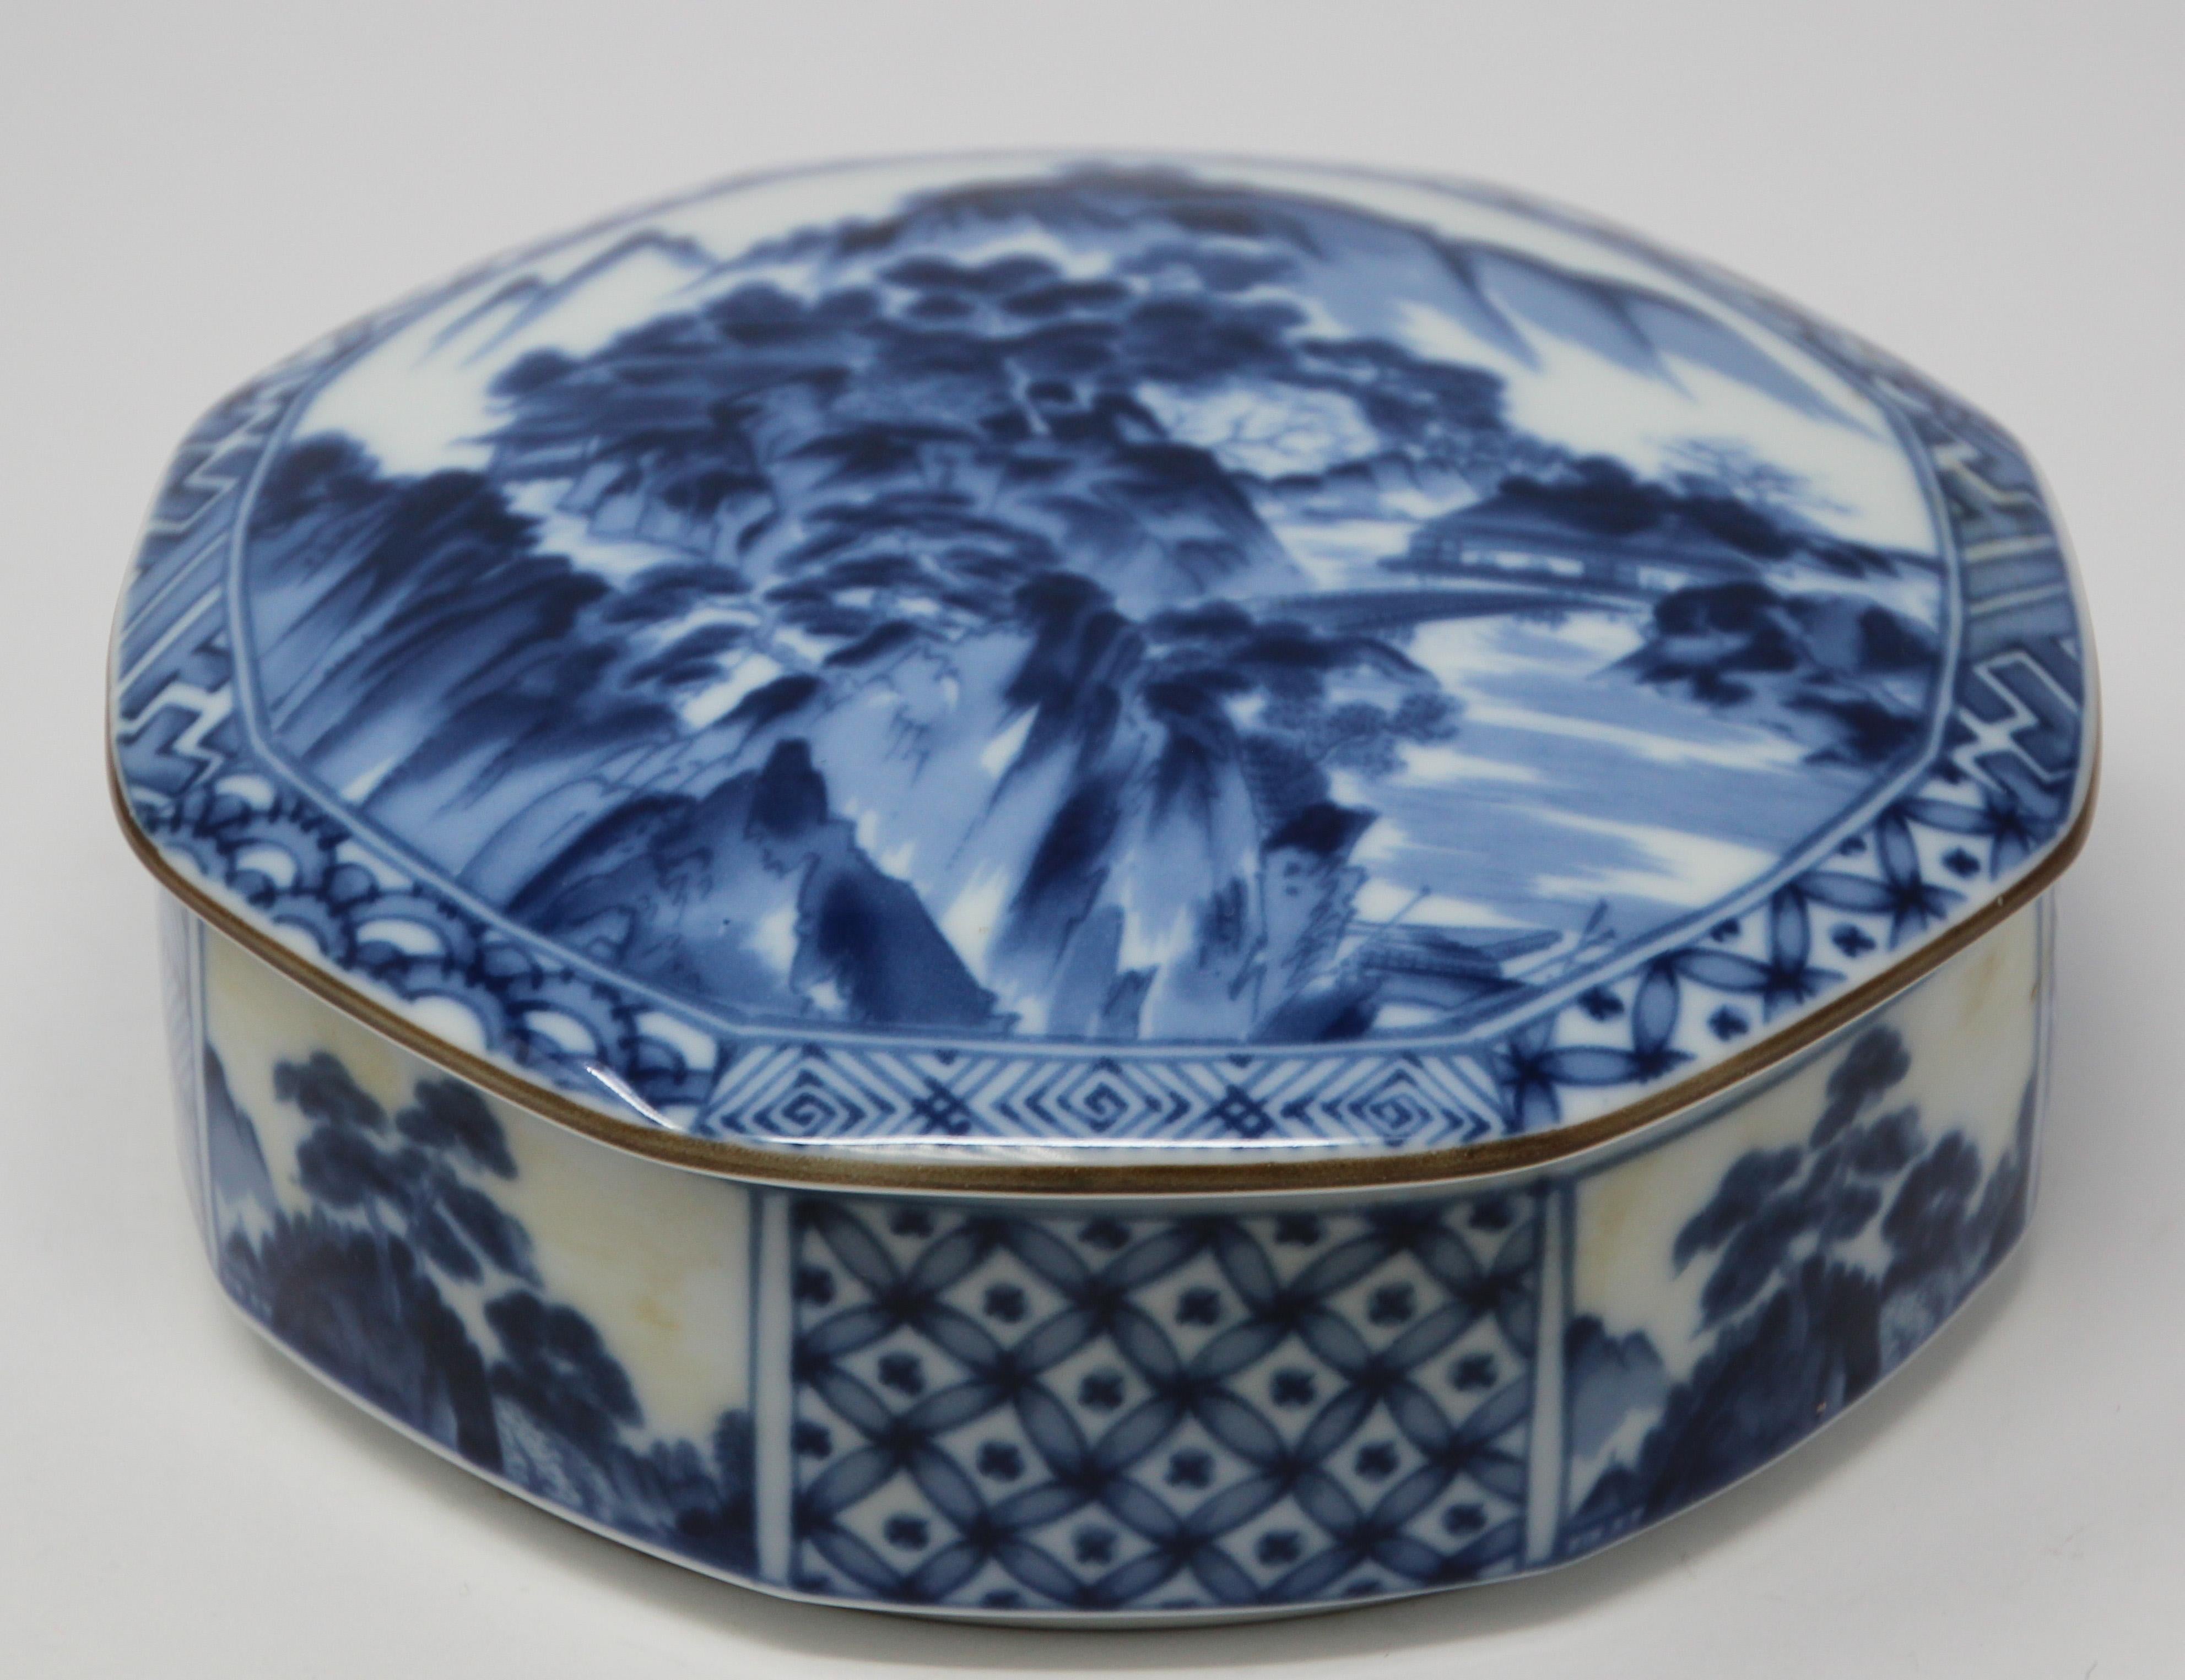 Tiffany & Co. blue and white porcelain round dish, trinket box.
The porcelain lid cover and sides are decorated with a blue and white Chinese style decor.
Makes an elegant unique decorative collectible
Designed by Tiffany & Co. Stamped Tiffany &